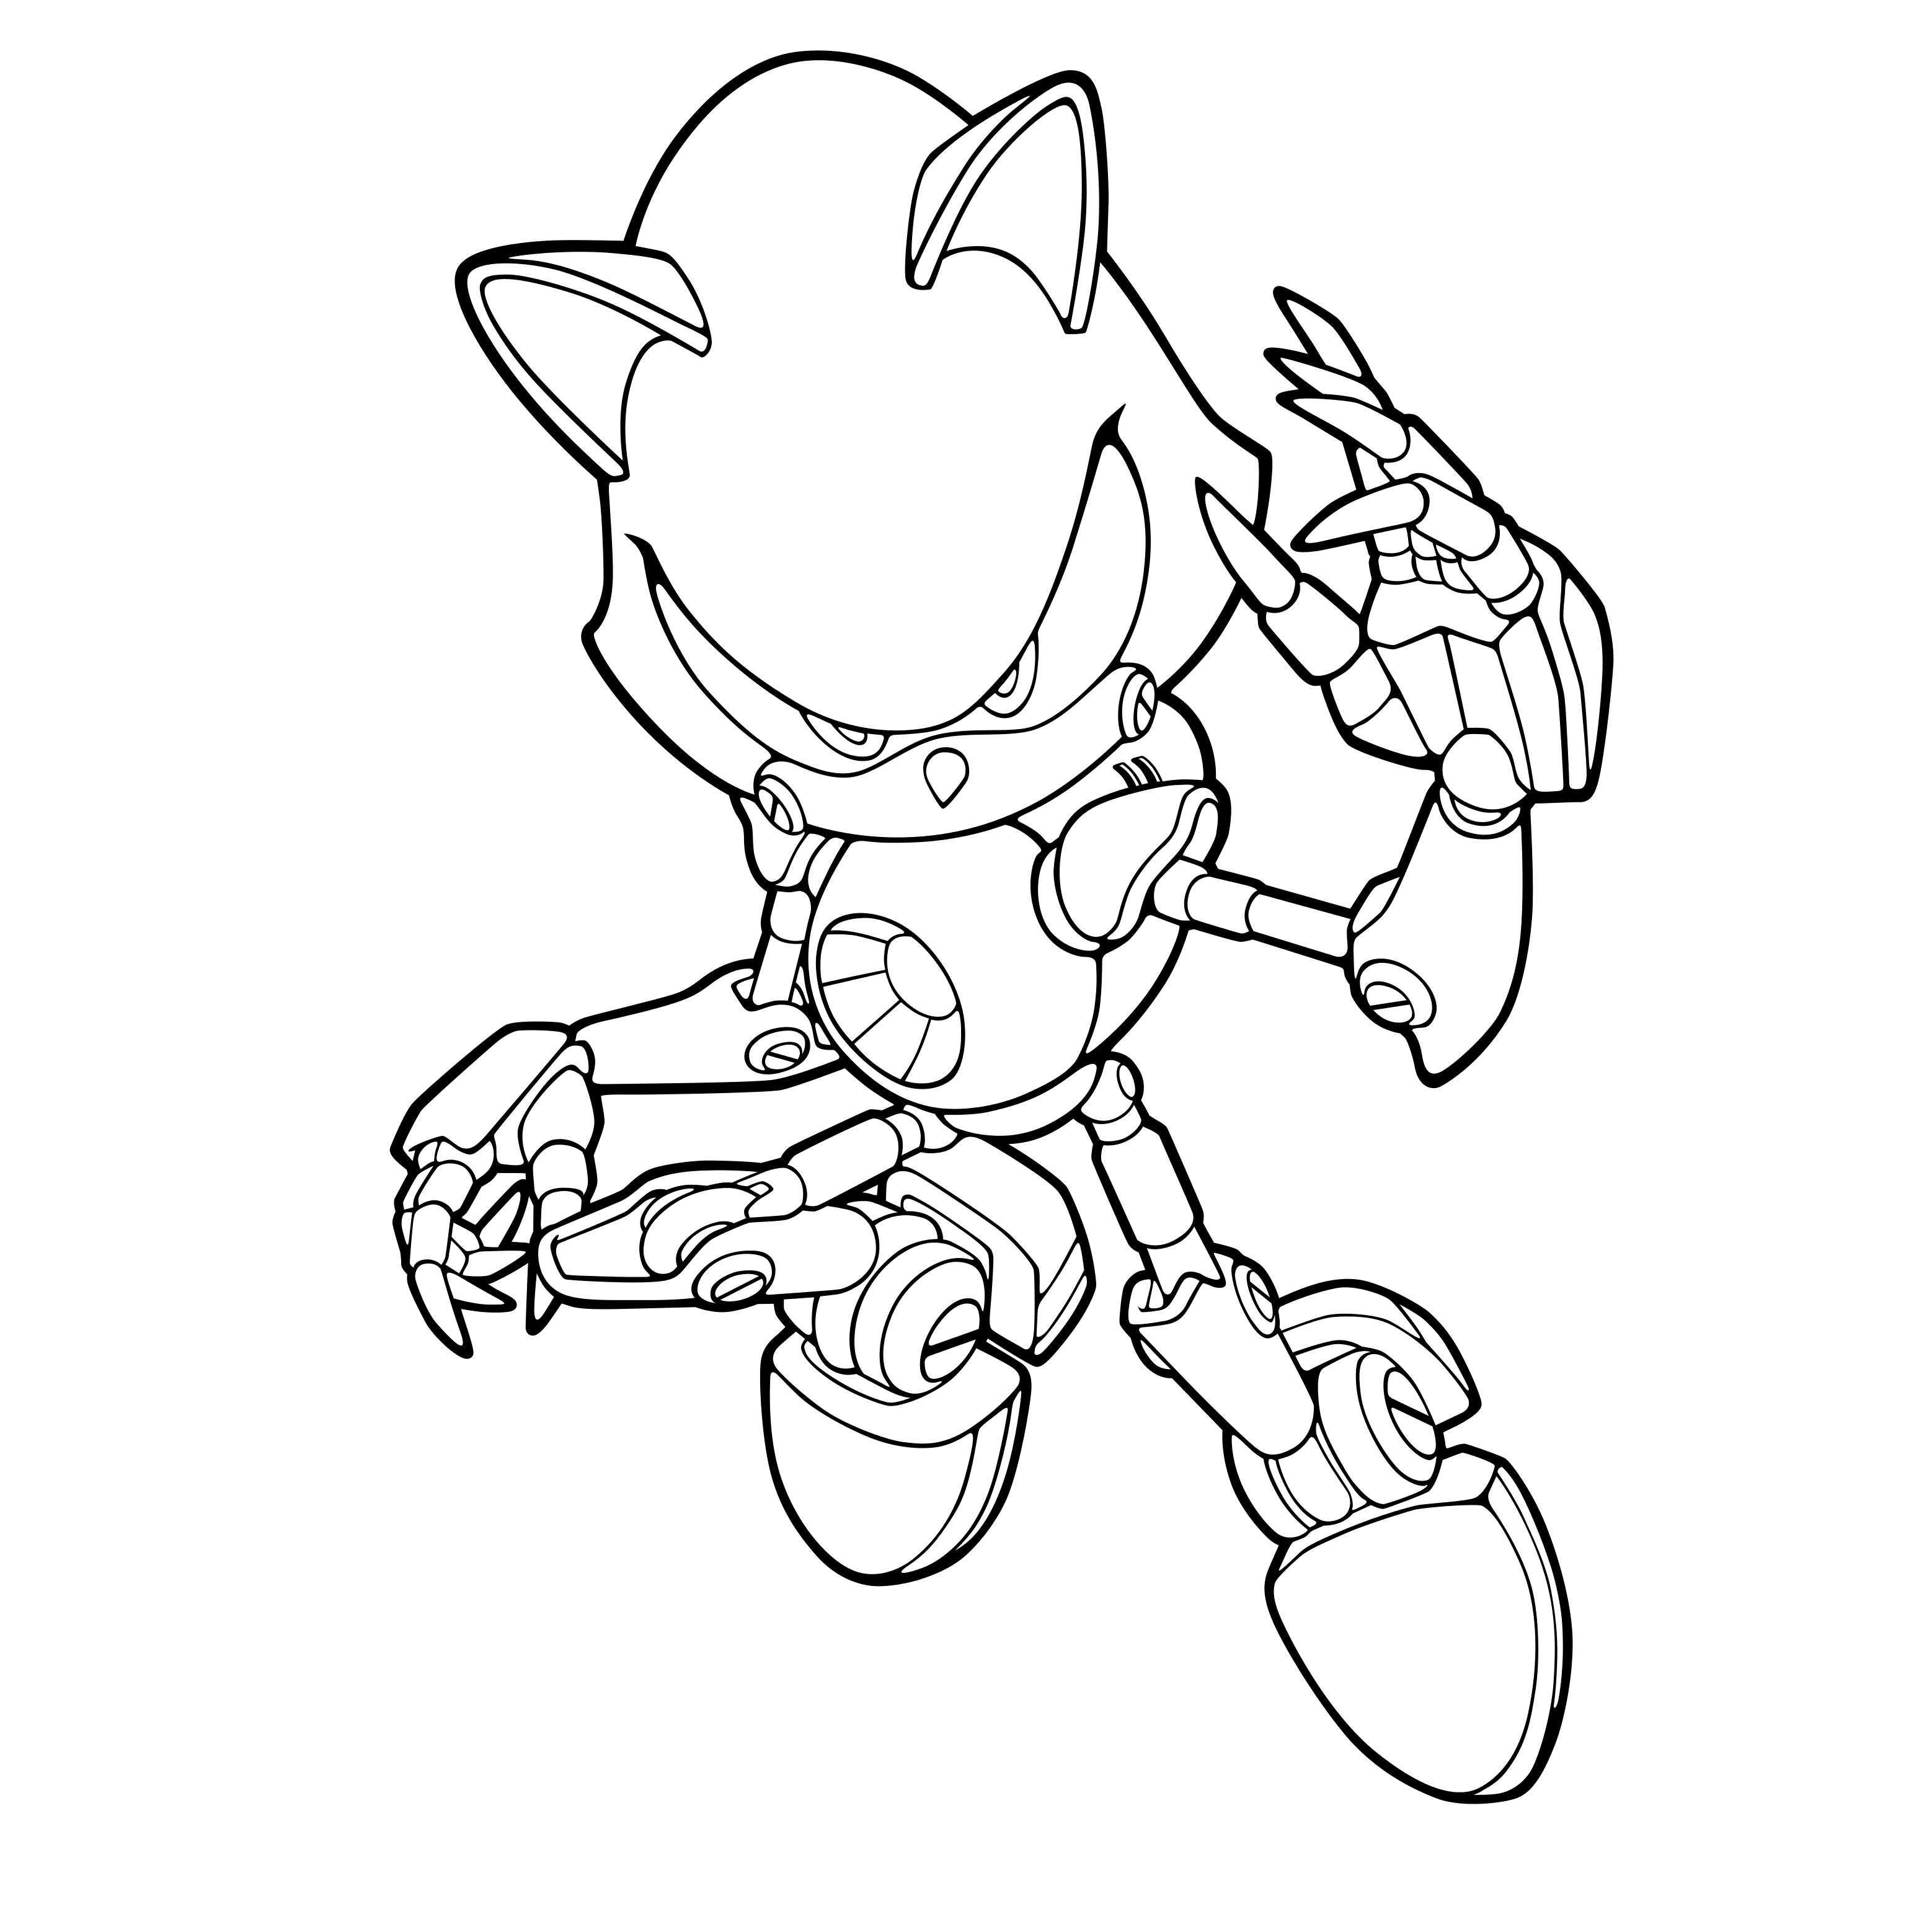 Regal blue sonic coloring page